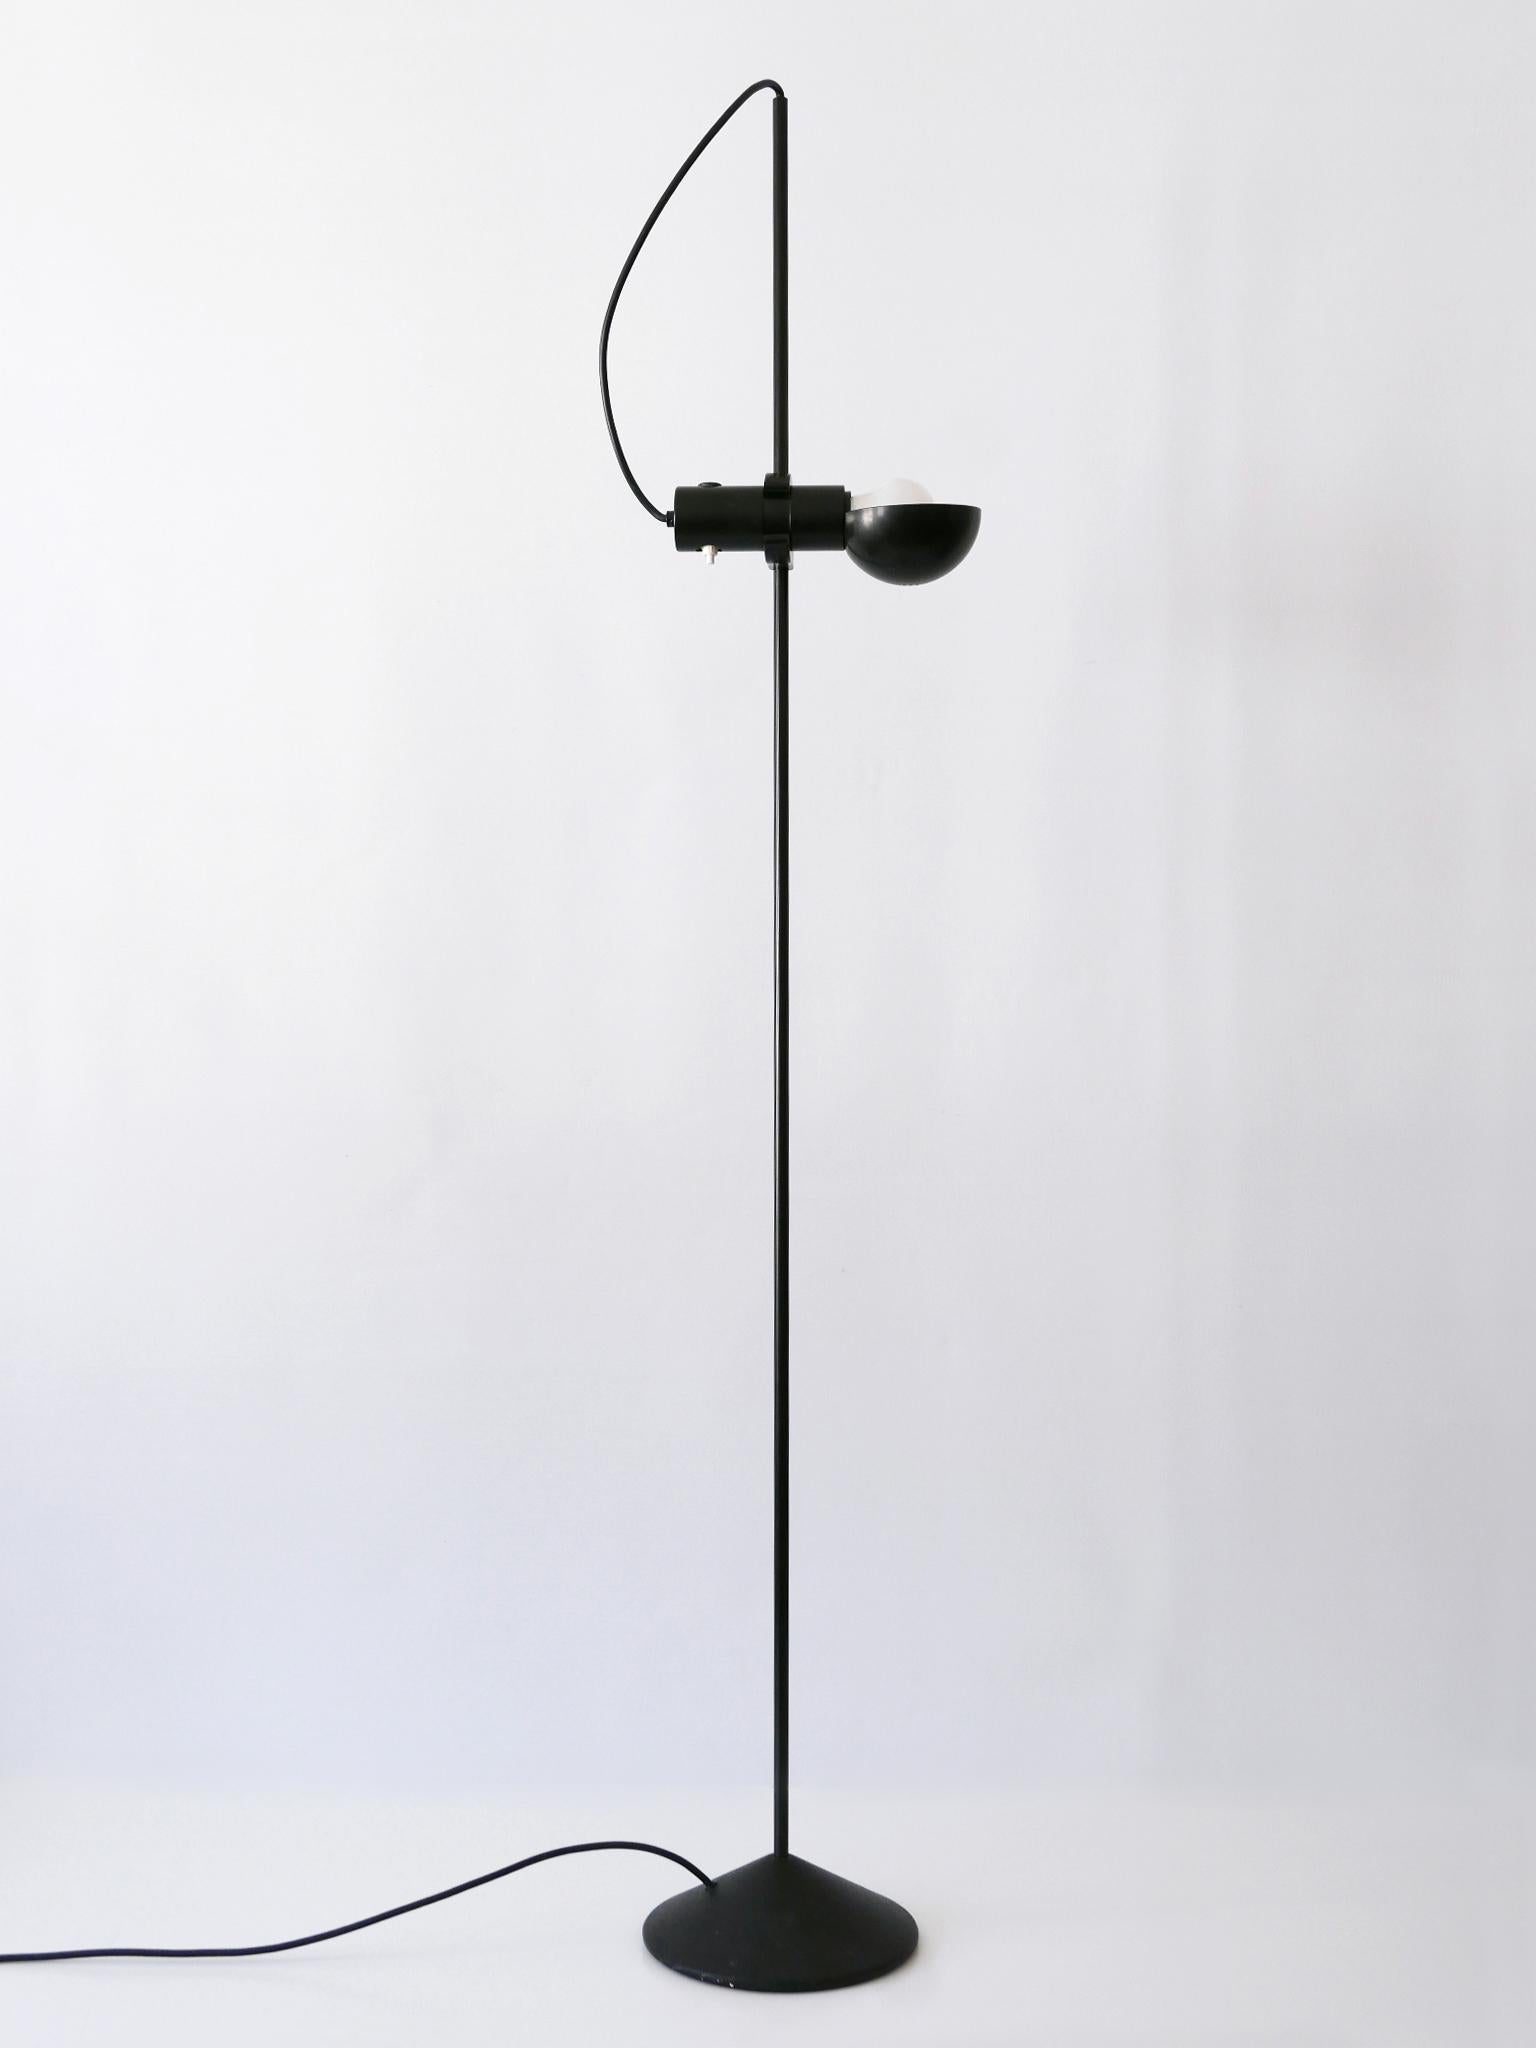 Rare Floor Lamp or Reading Light by Barbieri e Marianelli for Tronconi 1970s For Sale 2